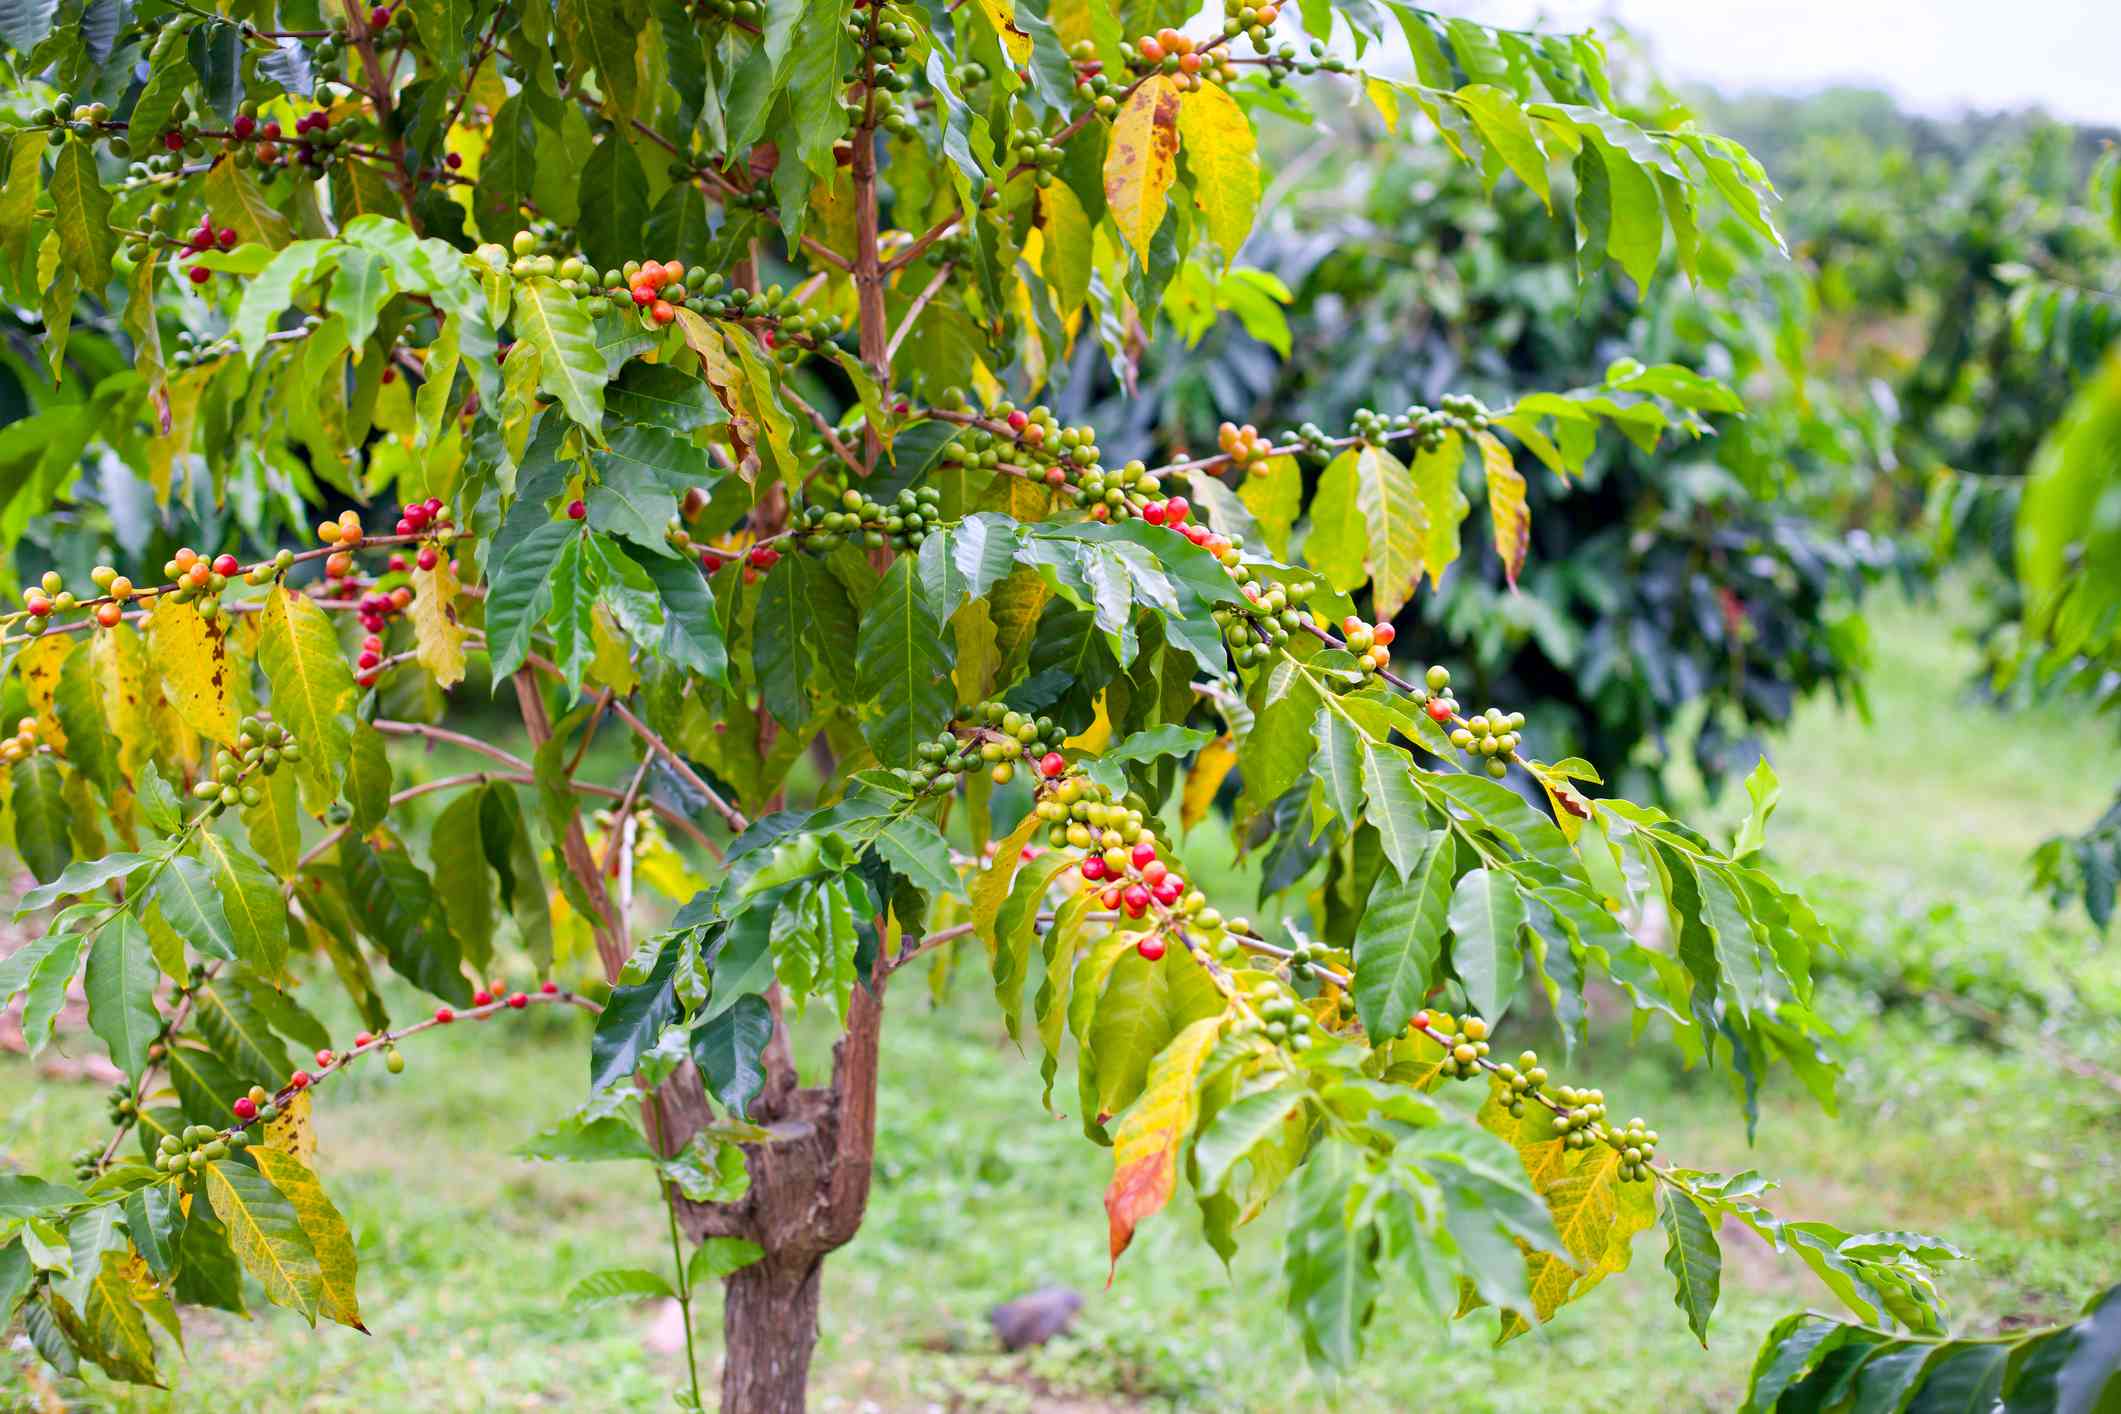 Kona beans are surrounded by a brightly coloured cherry before harvesting.